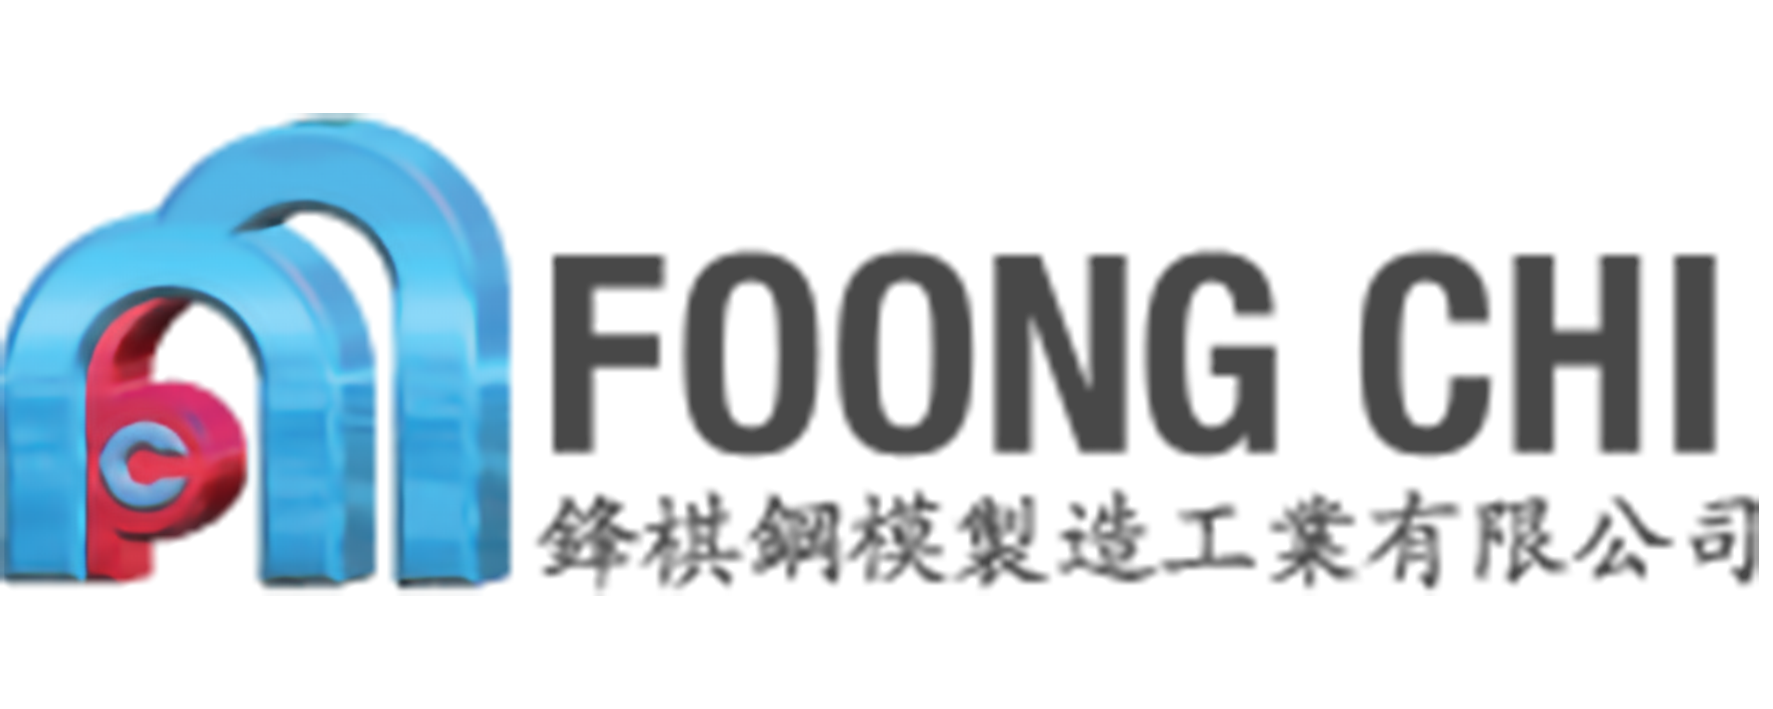 Foong Chi Mould Industries